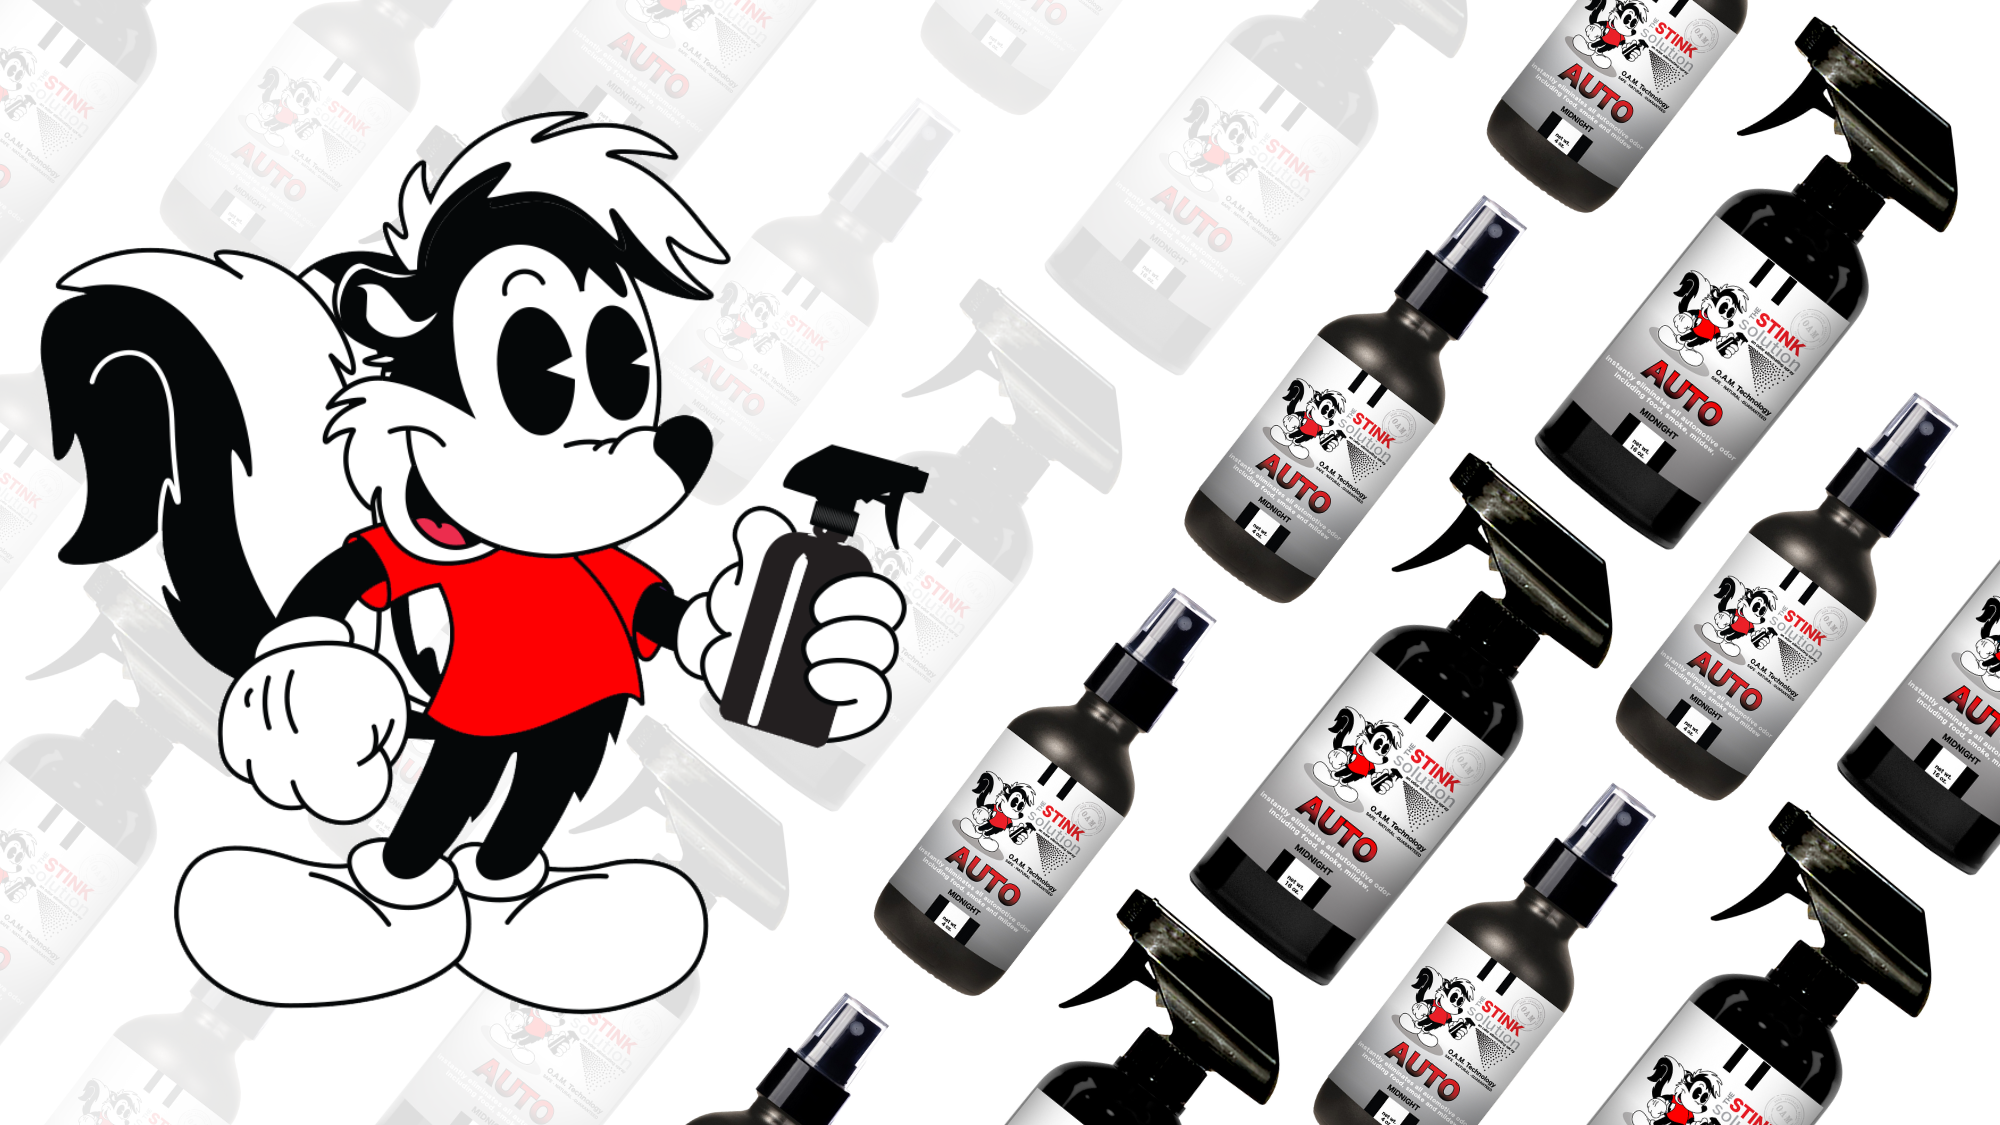 Odor Eliminating Spray for Cars by The Stink Solution